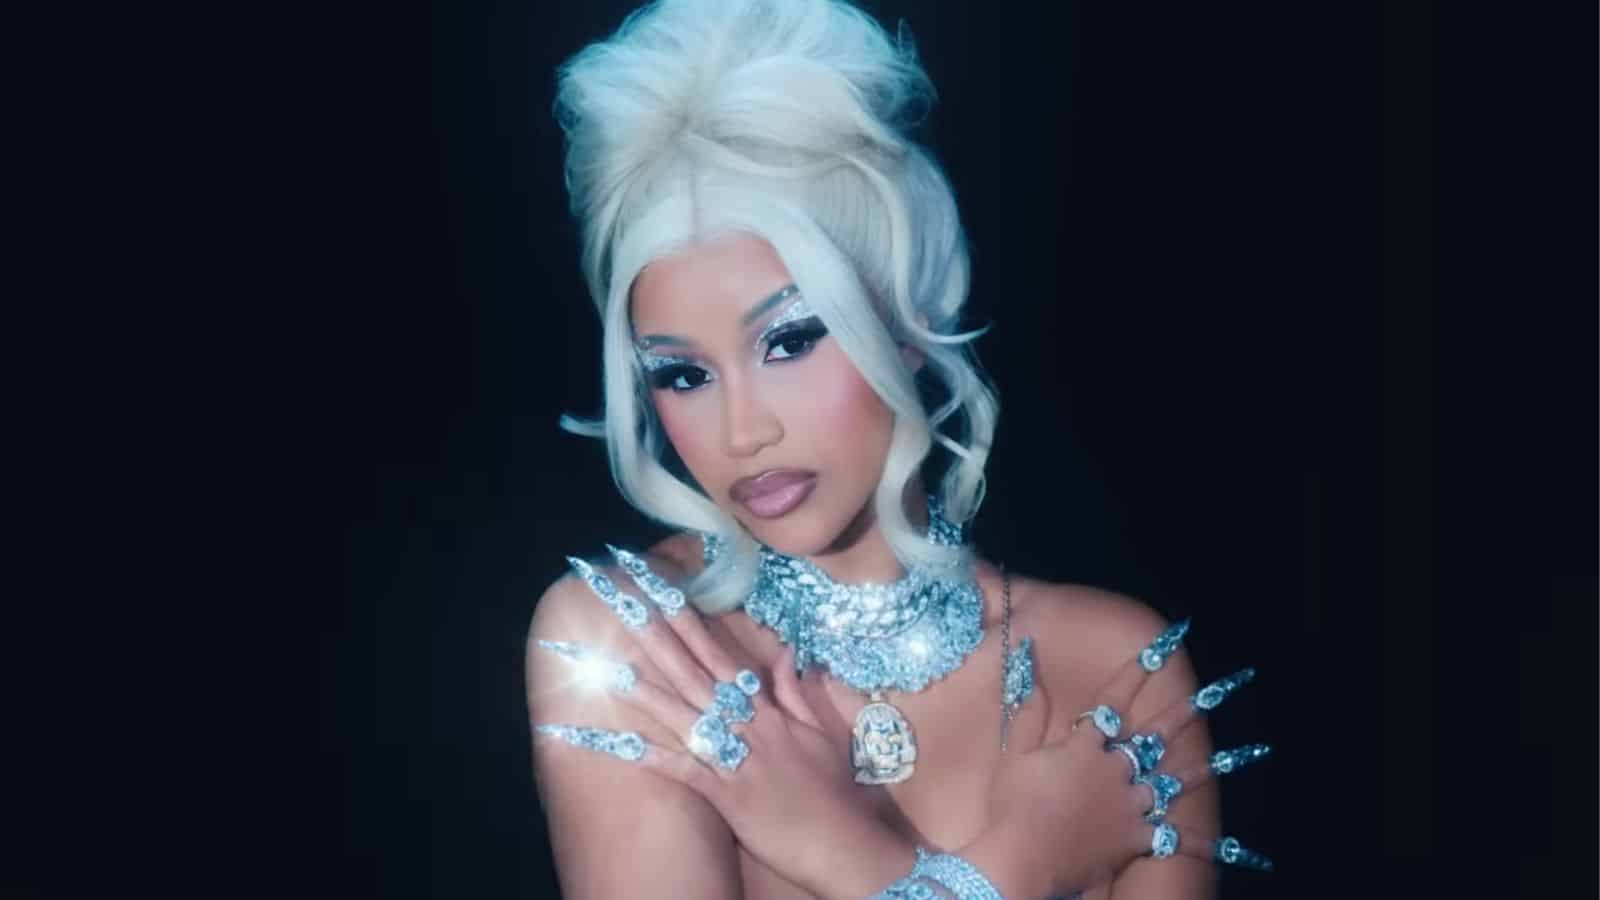 Cardi B wore a Modern Warfare 2 Ghost necklace in her latest music video